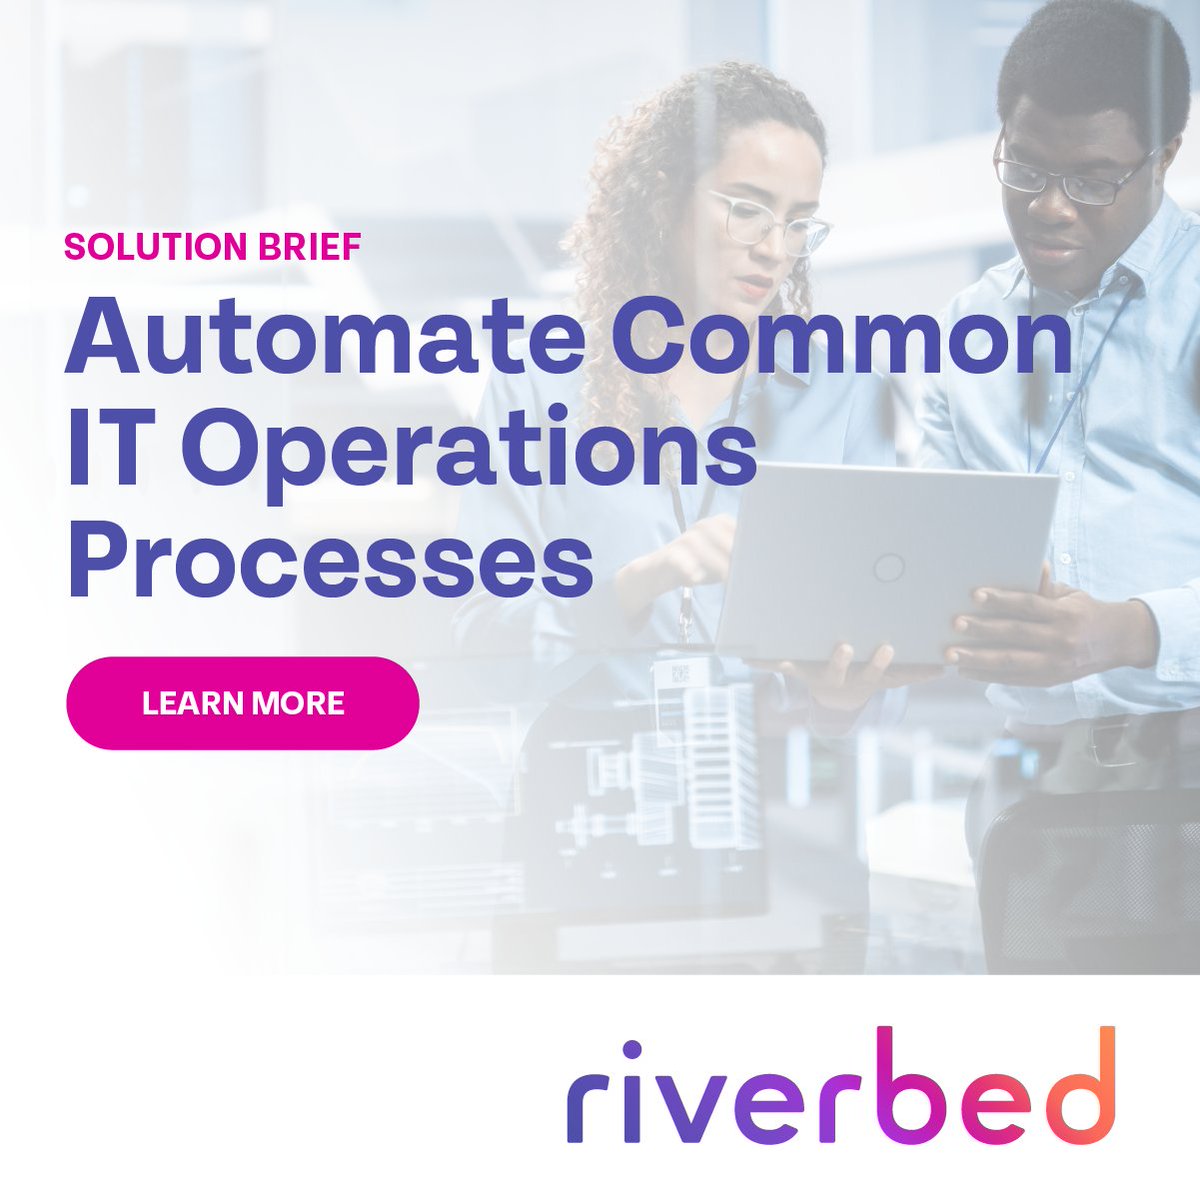 86% of IT leaders are looking for #observability tools that can automate troubleshooting. 🤖 Riverbed IQ uses intelligent #automation to streamline your repetitive IT tasks. Read more: rvbd.ly/448UC23